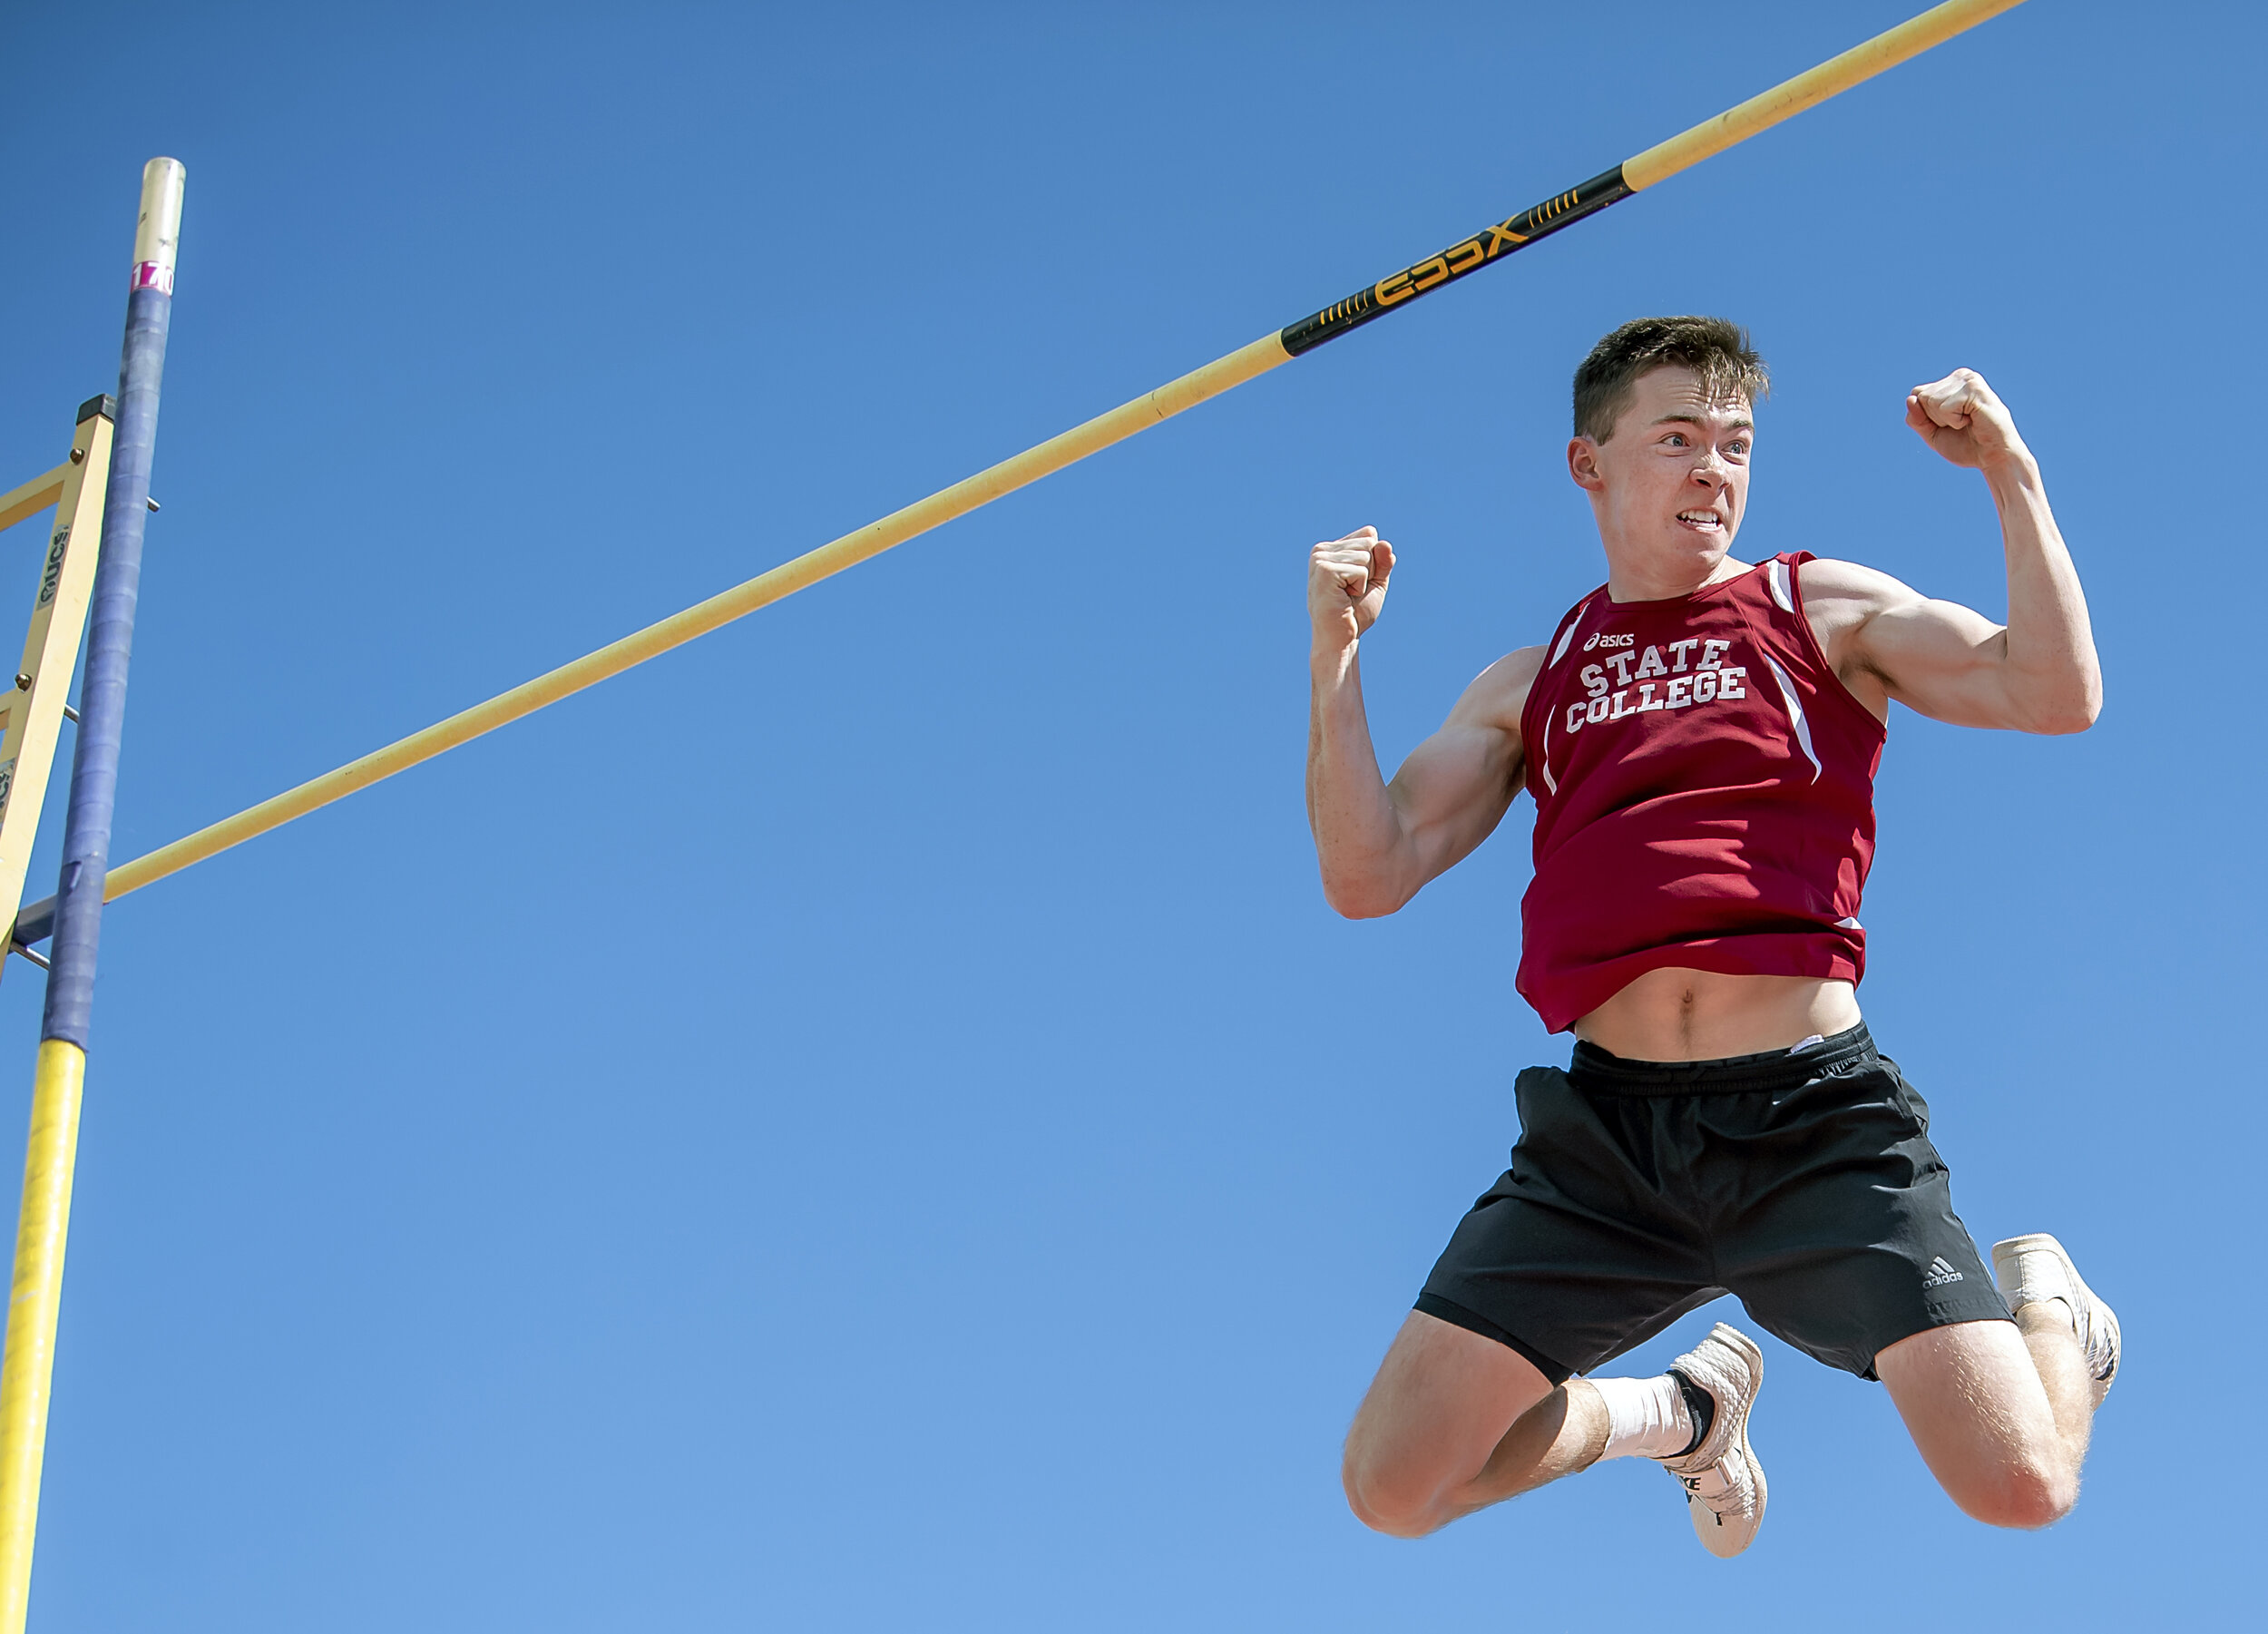  State College's Luke Knipe reacts after he cleared his personal best pole vault, 16 feet, to win gold during the PIAA track and field championships on Friday, May 24, 2019, at Shippensburg University.  